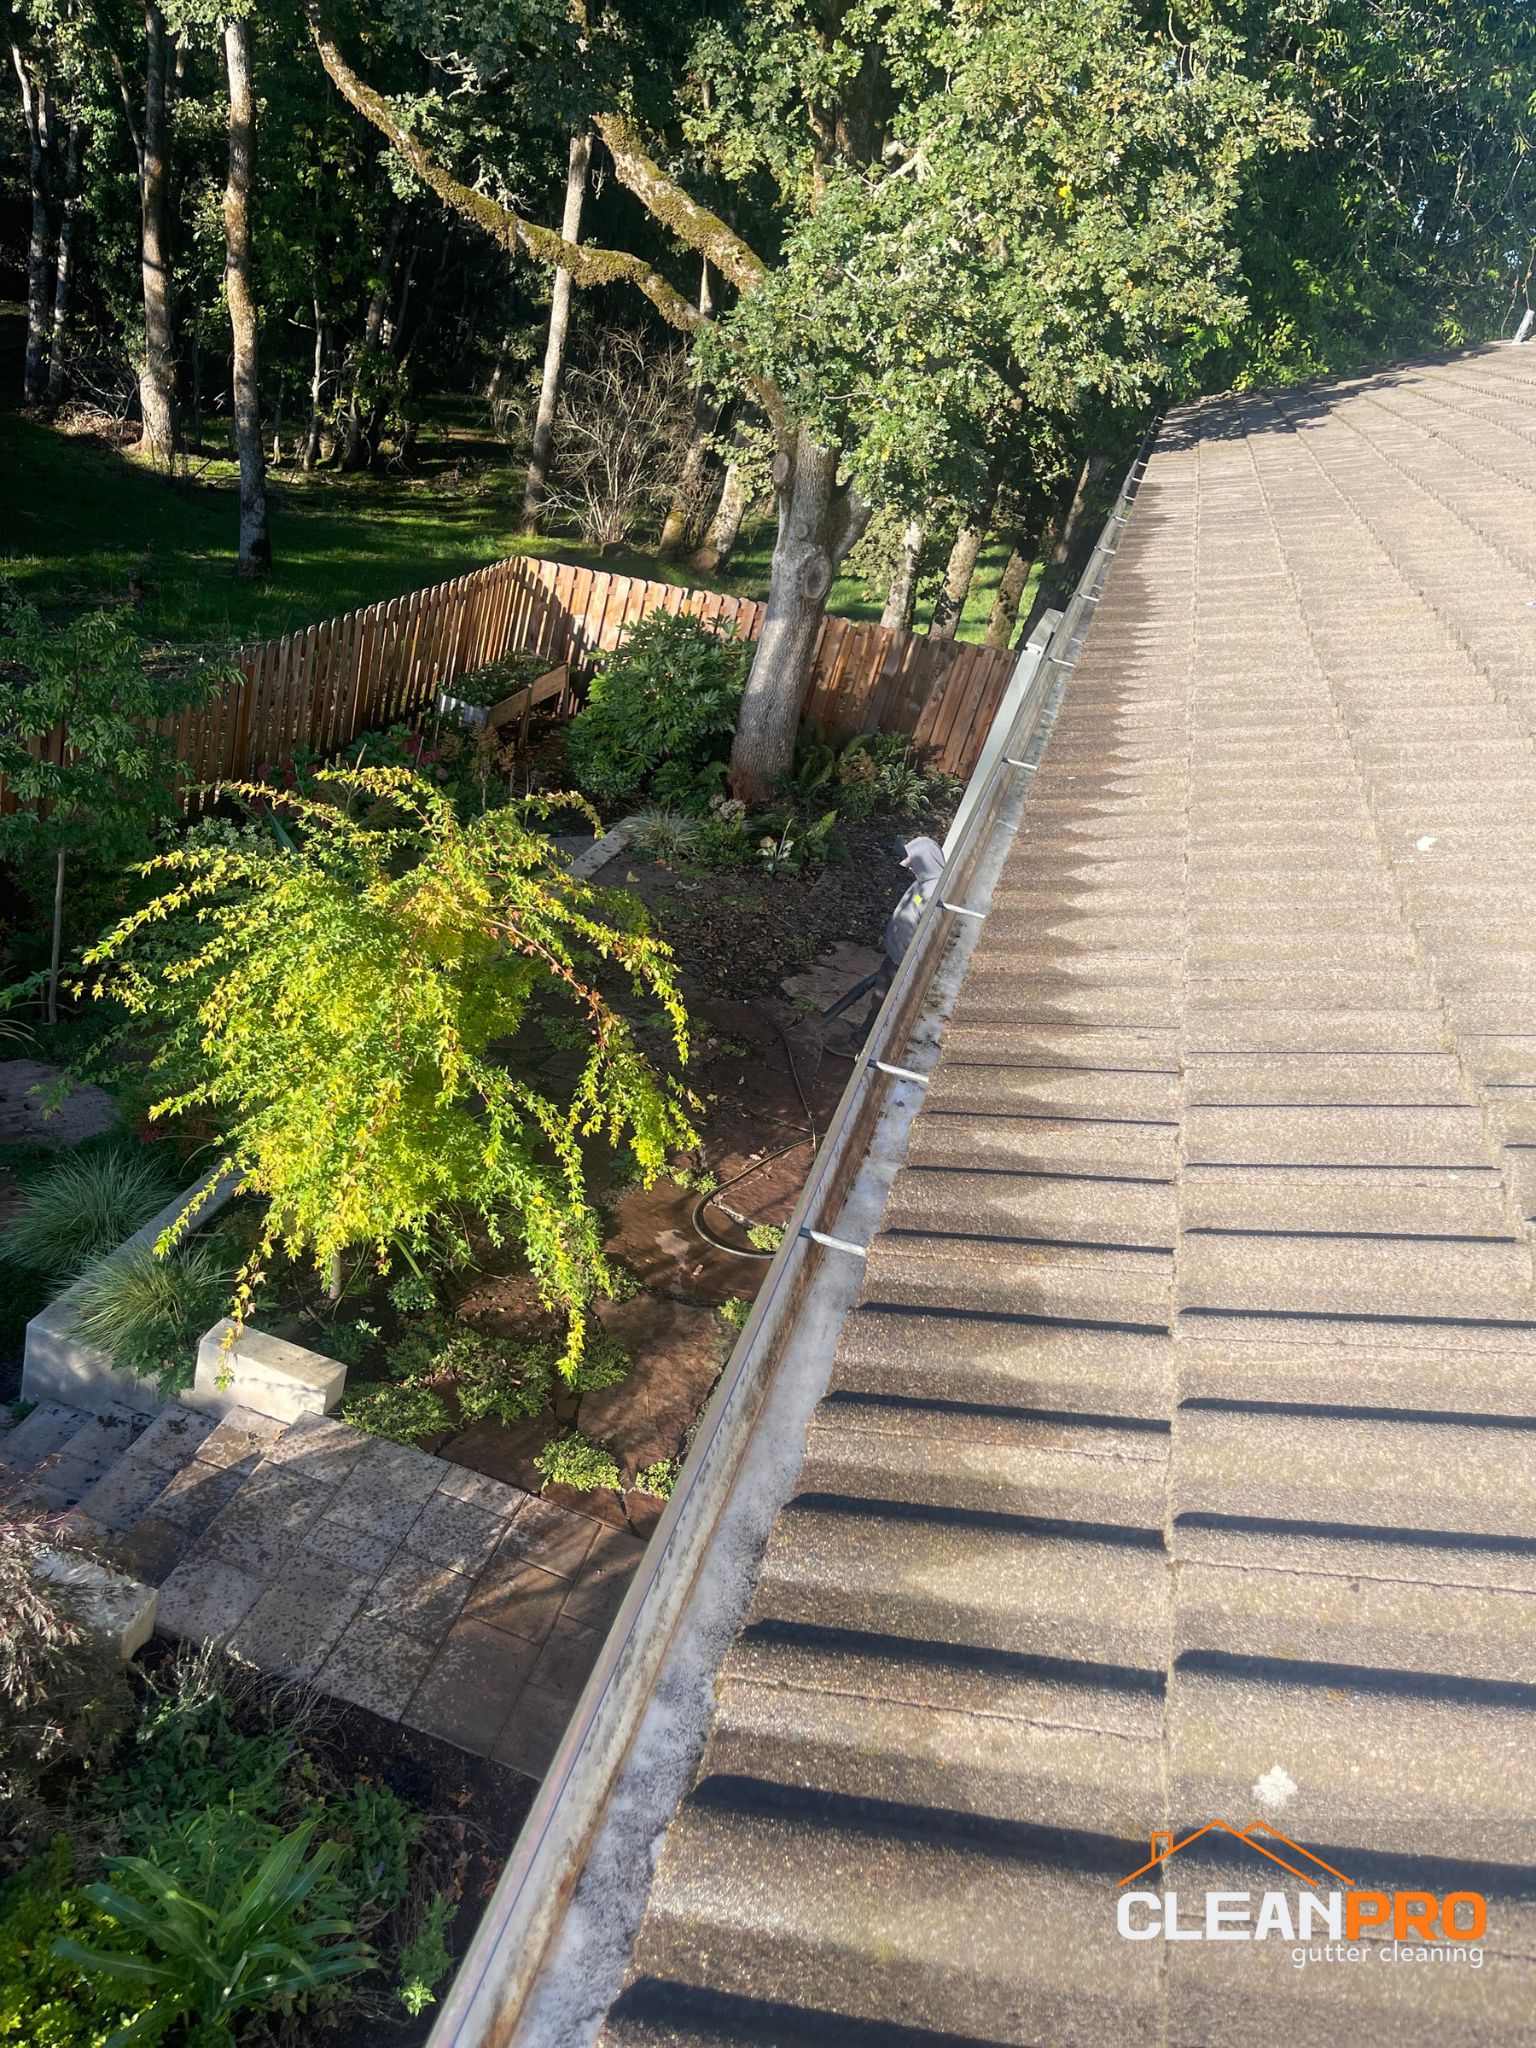 Residential Gutter Cleaning in Portland OR